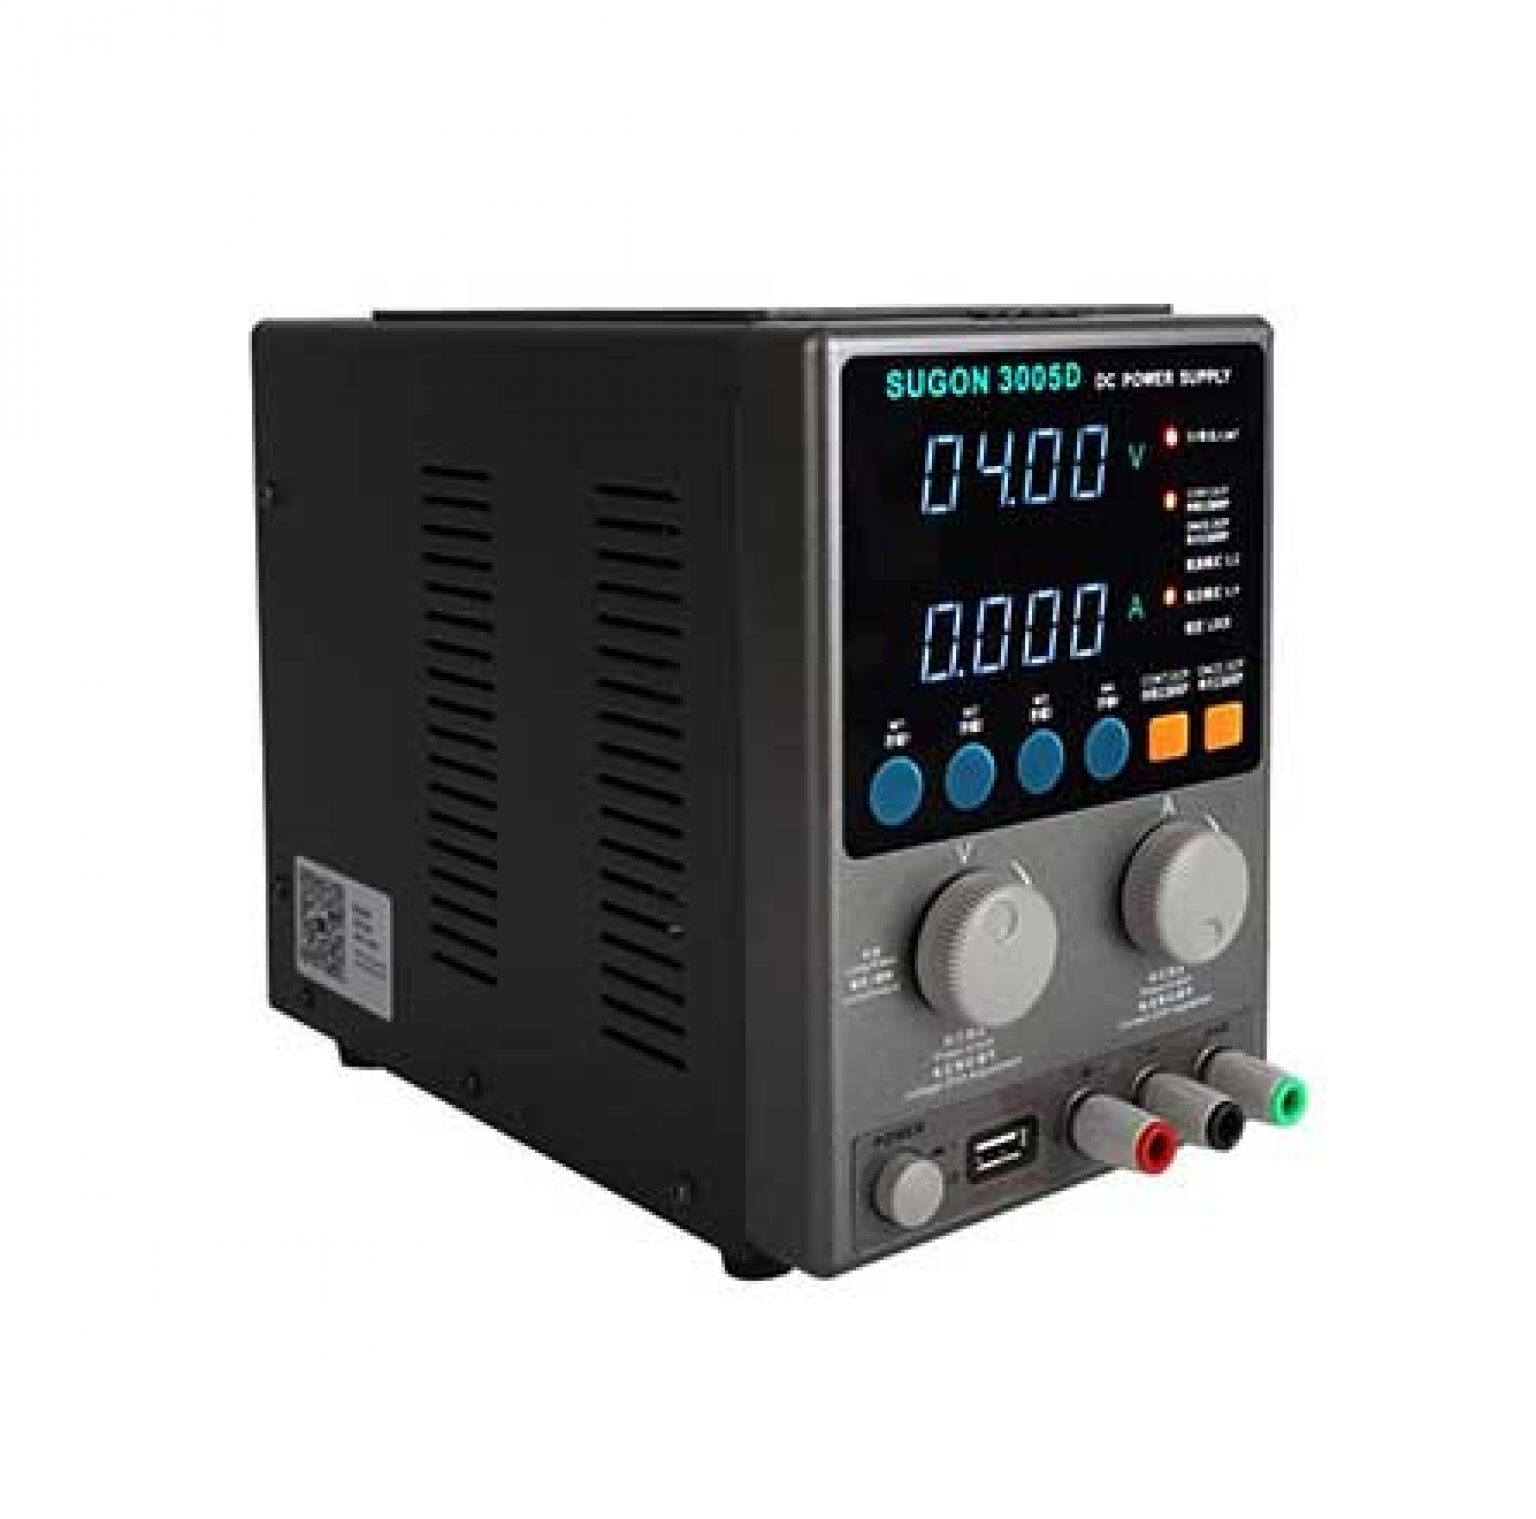 SUGON 3005D DC Power Supply | Baba Tools